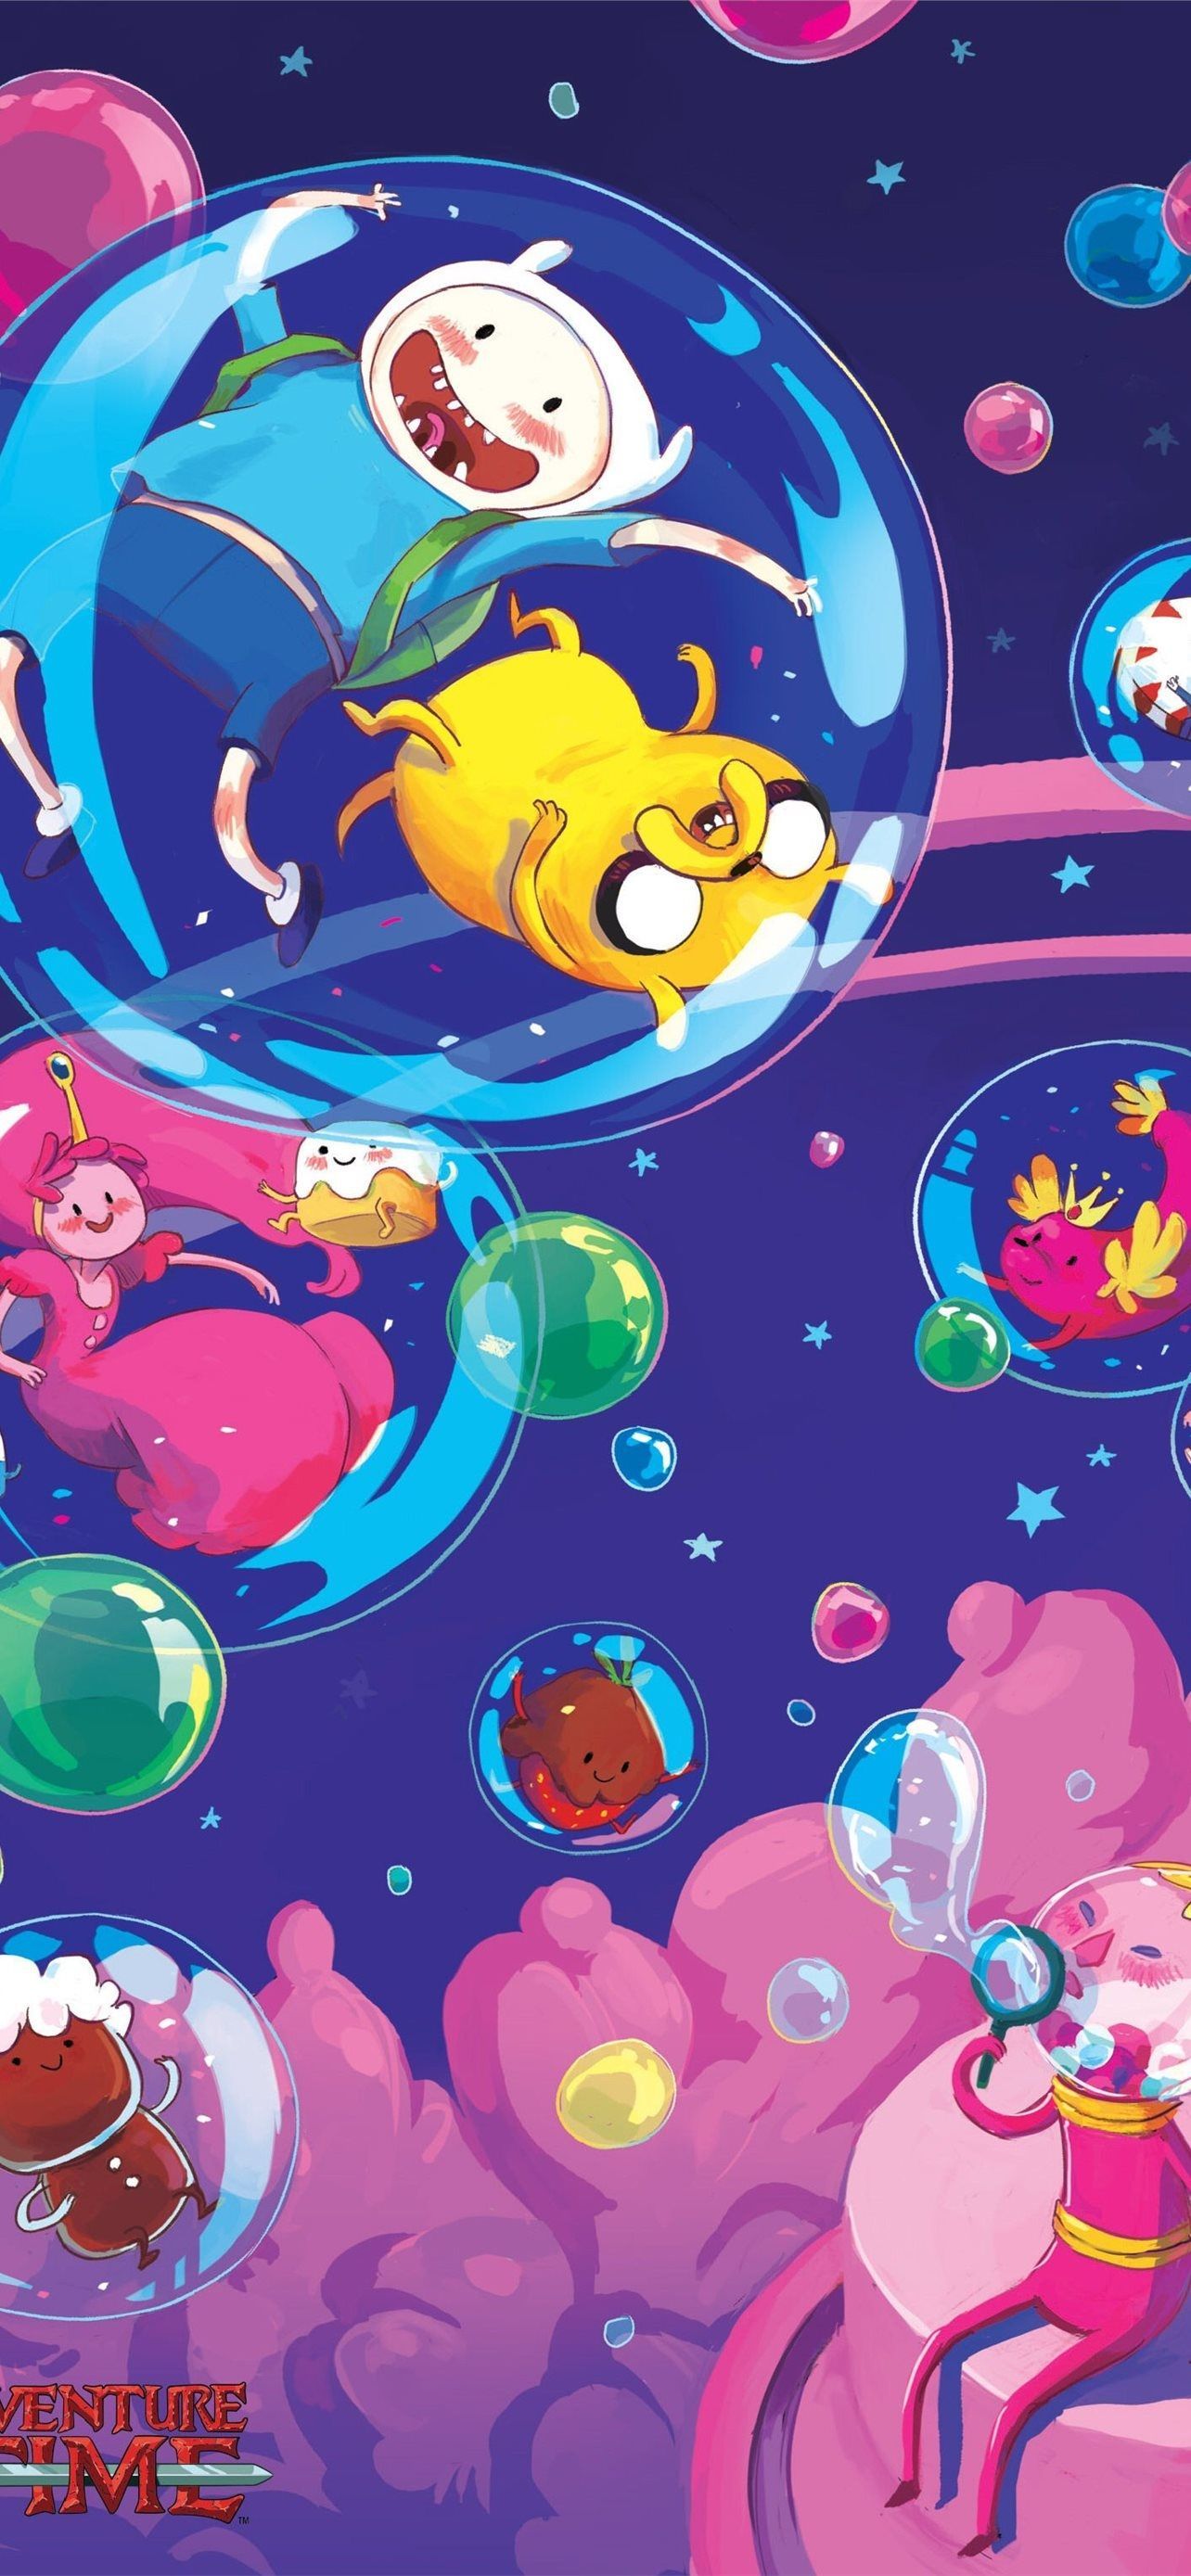 Adventure Time And Jake Inside The Boat Wallpaper Download - Adventure Time